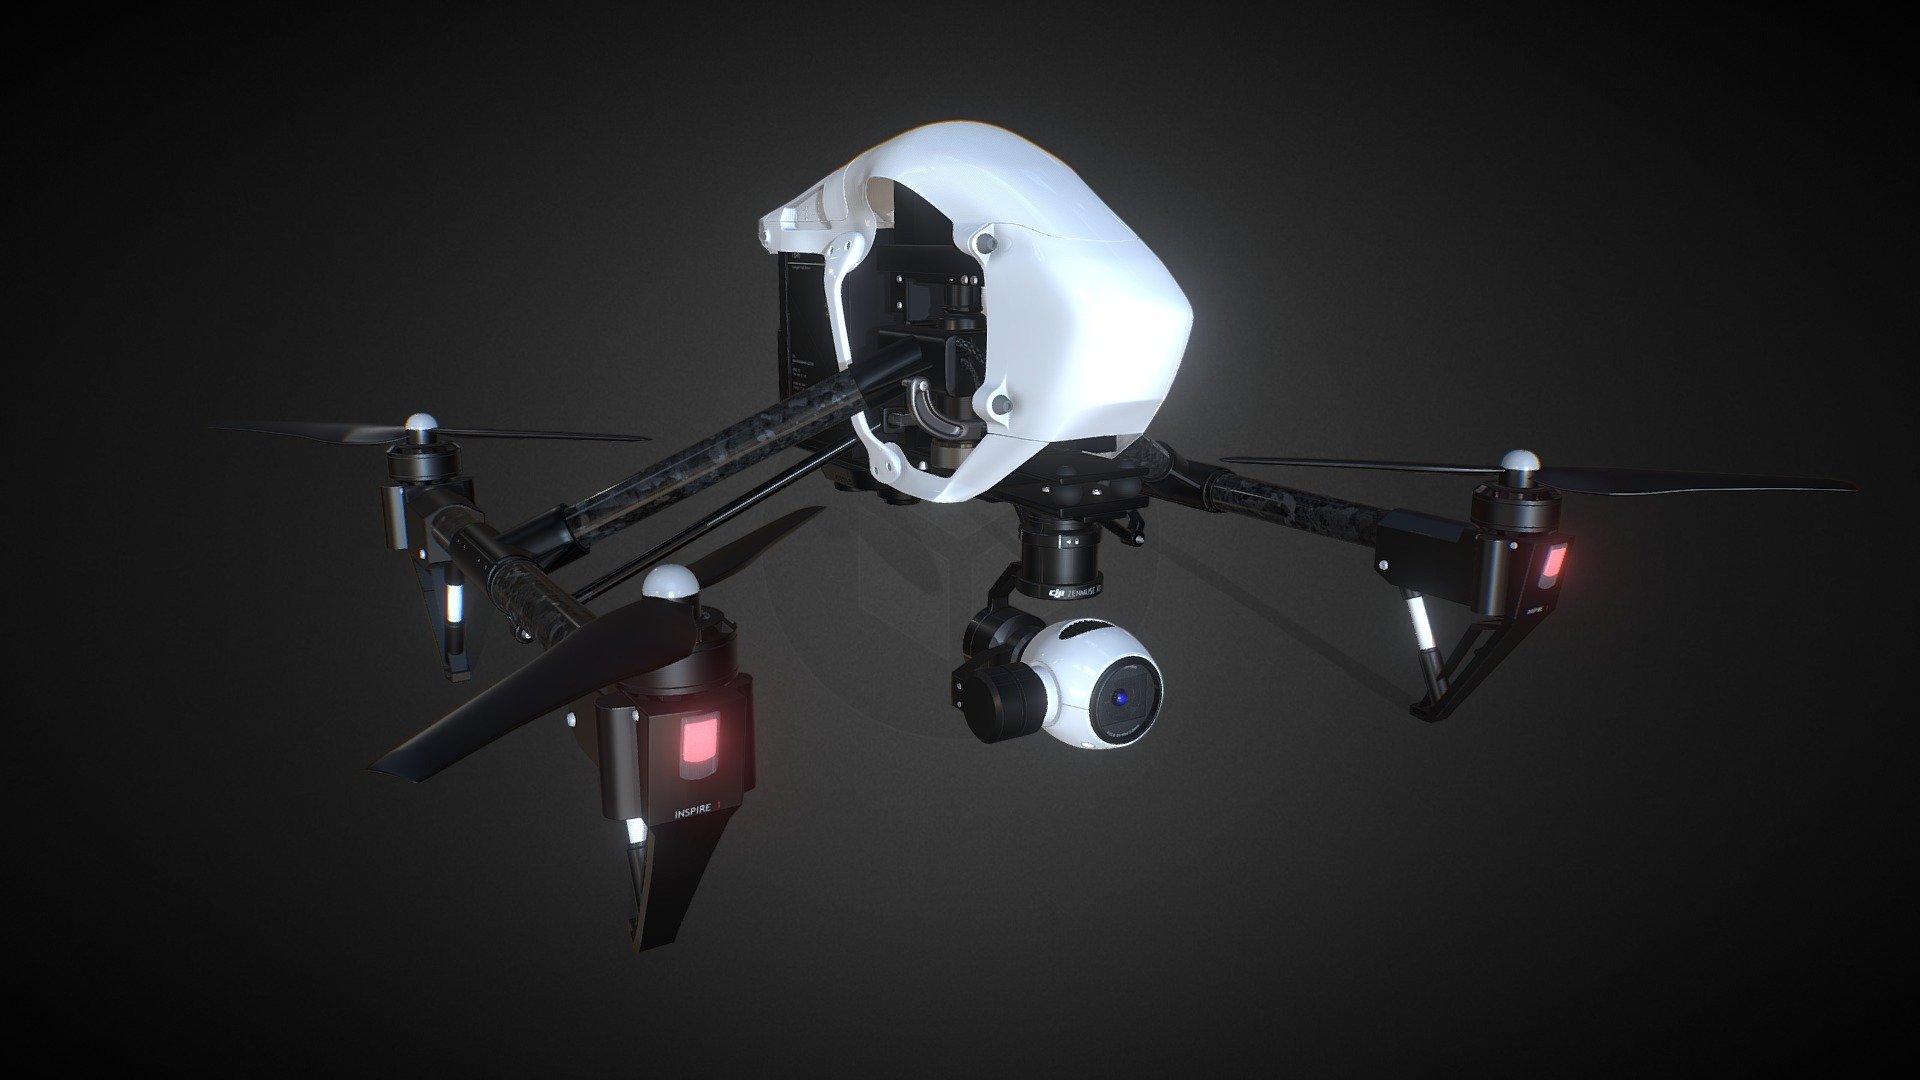 Great Hight Detailed 3d model of DJI Inspire 1 Pro have Unwrapped uv map non overlapped polygon.
- detailed enough for close-up renders
*- file format - max2011, 2014, 3dm,c4d, abc, lwo, 3ds, obj, fbx
- real world size 438x451x301 mm (system units - mm) - DJI Inspire1 PRO 3D model - Buy Royalty Free 3D model by omg3d 3d model